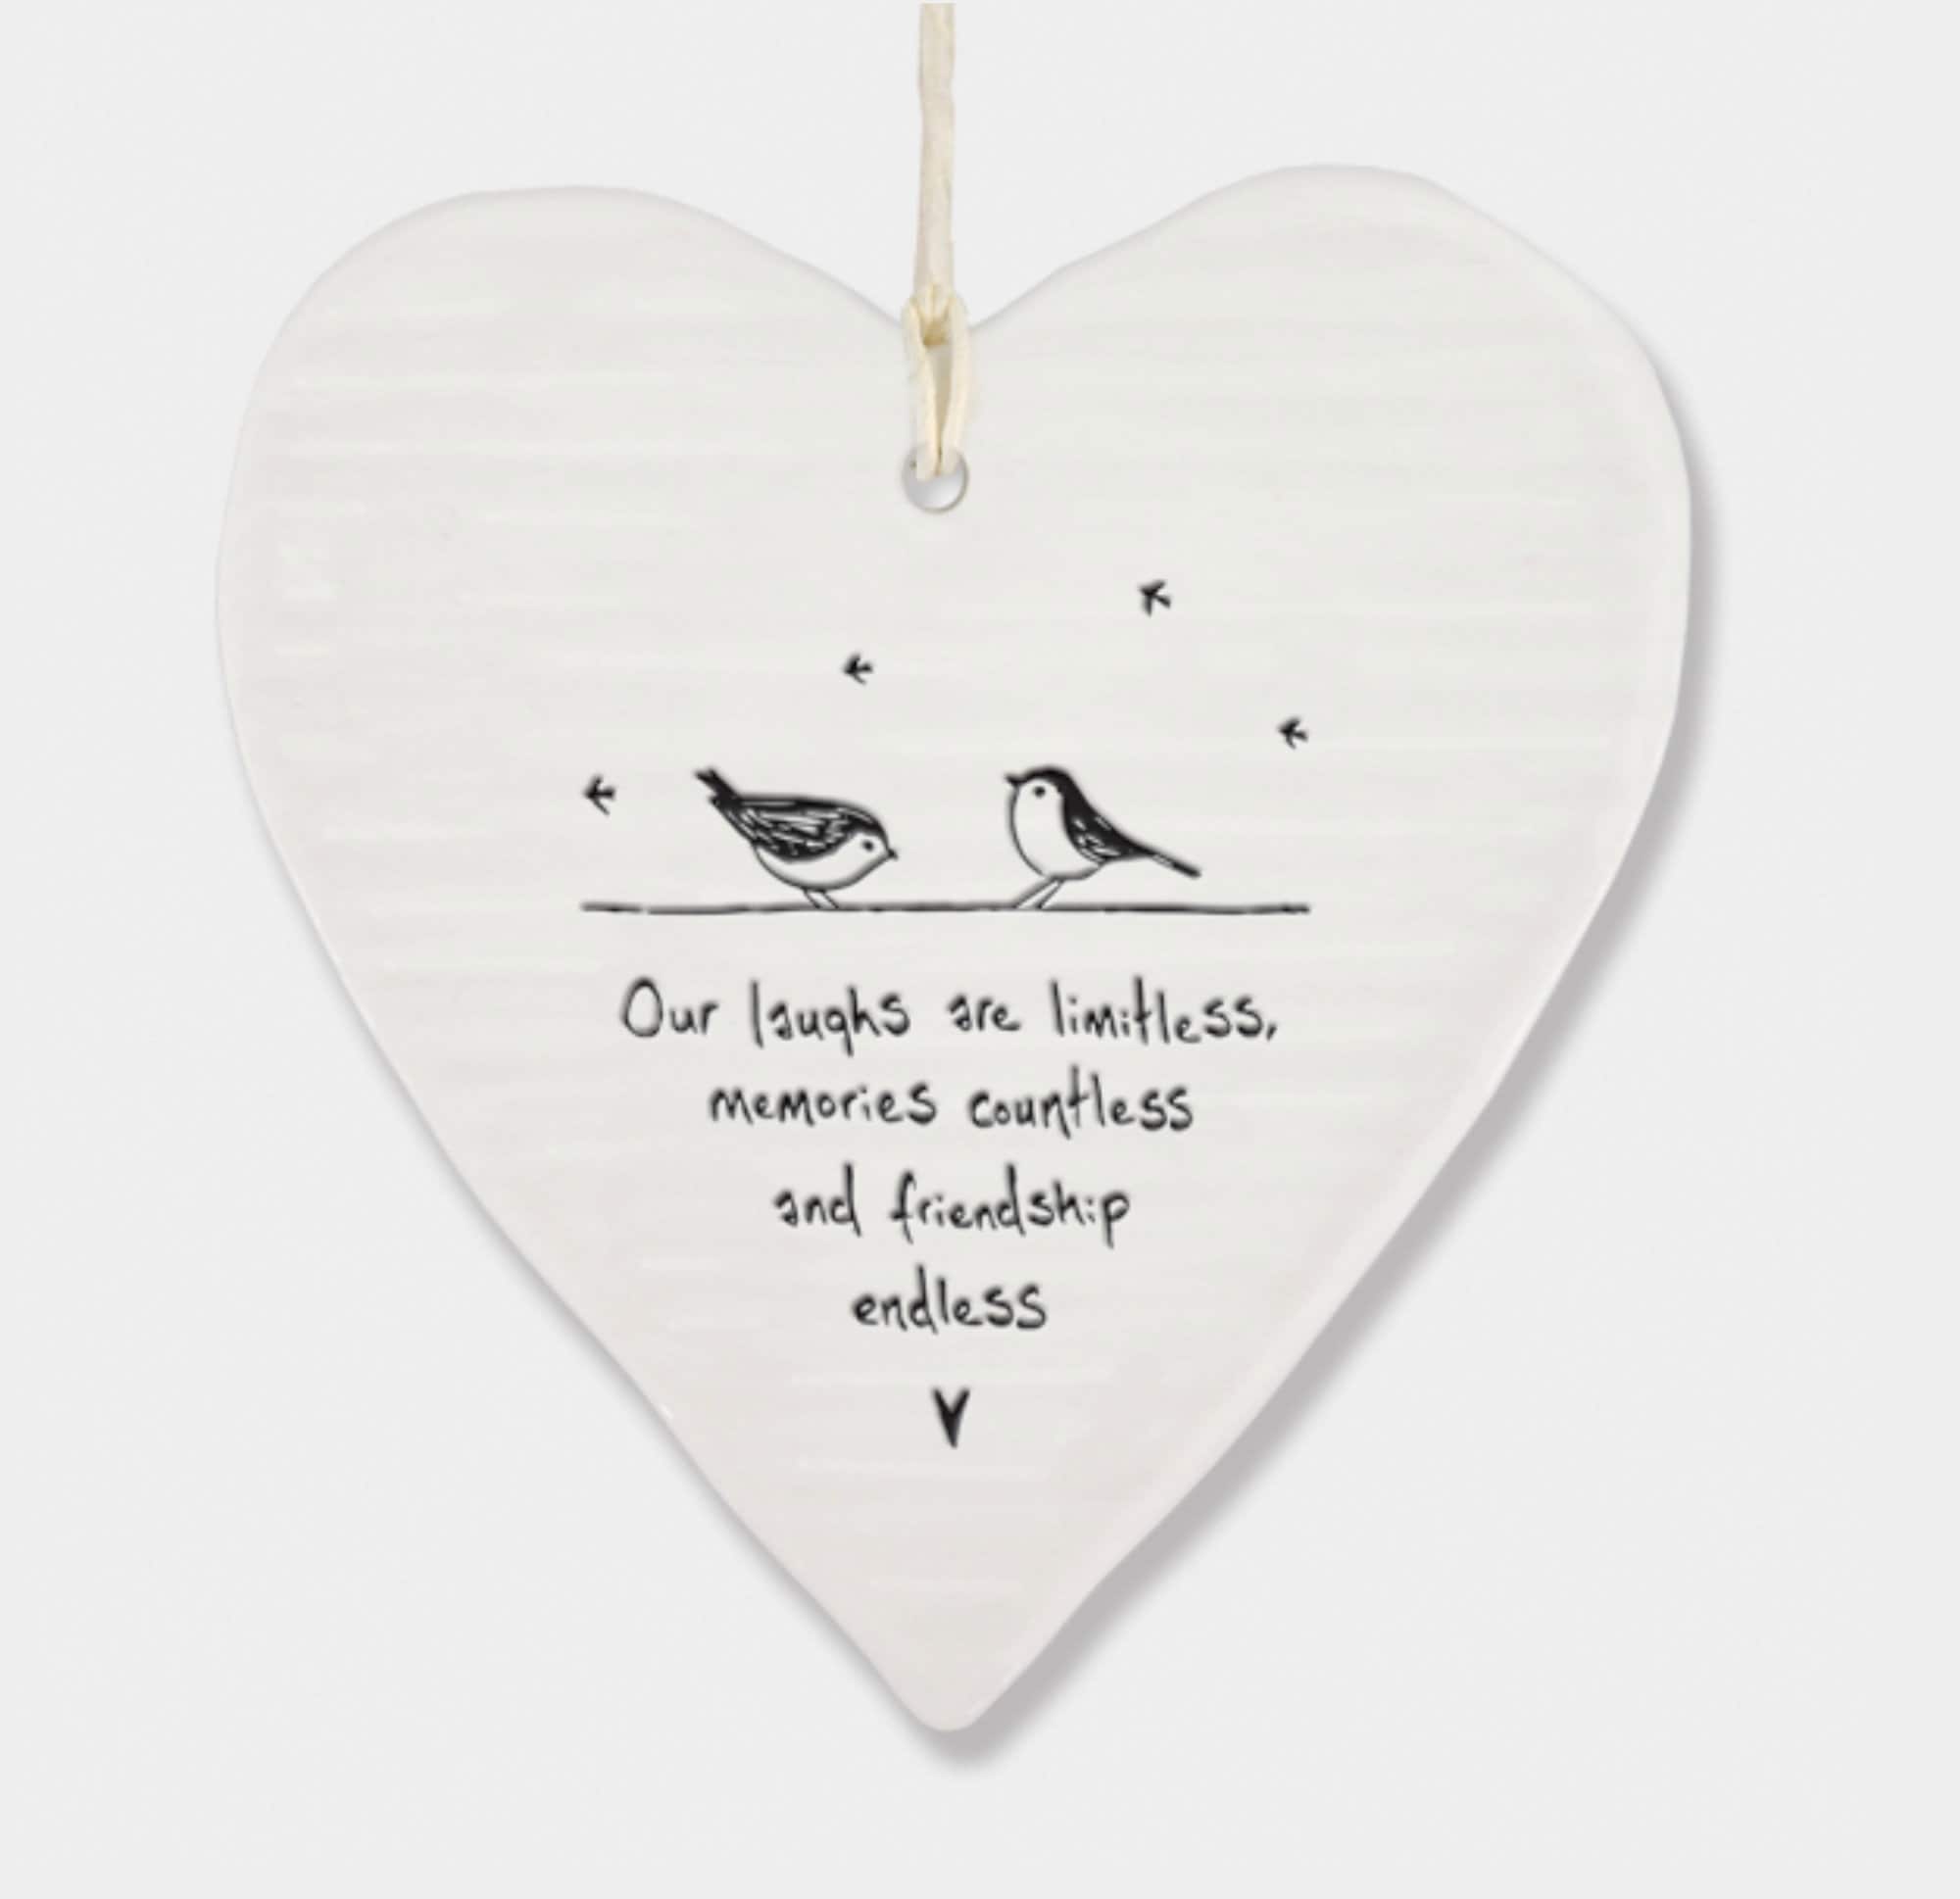 Various sentimental messages East of India Hanging Porcelain Hearts by East of India 